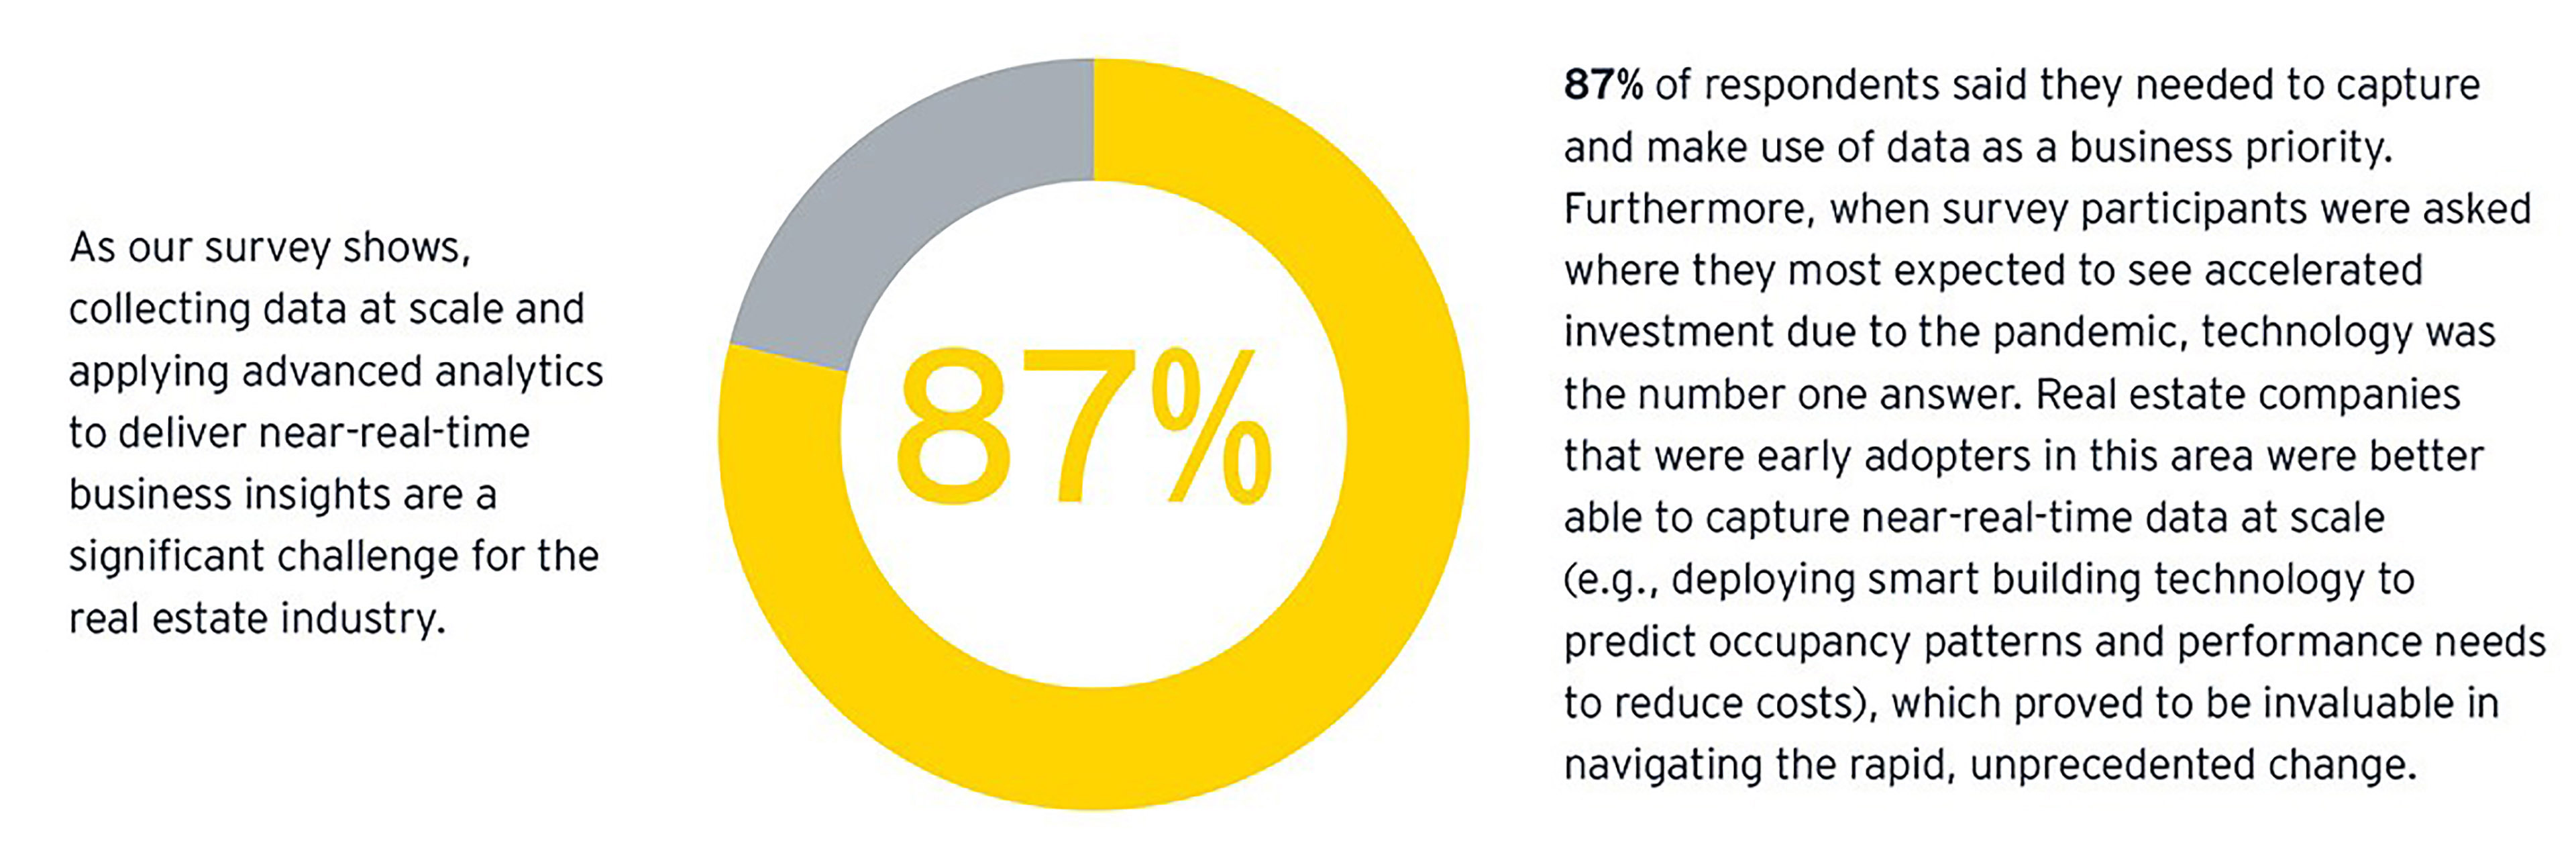 87 percent of respondents siad they need to capture use of data as business priority